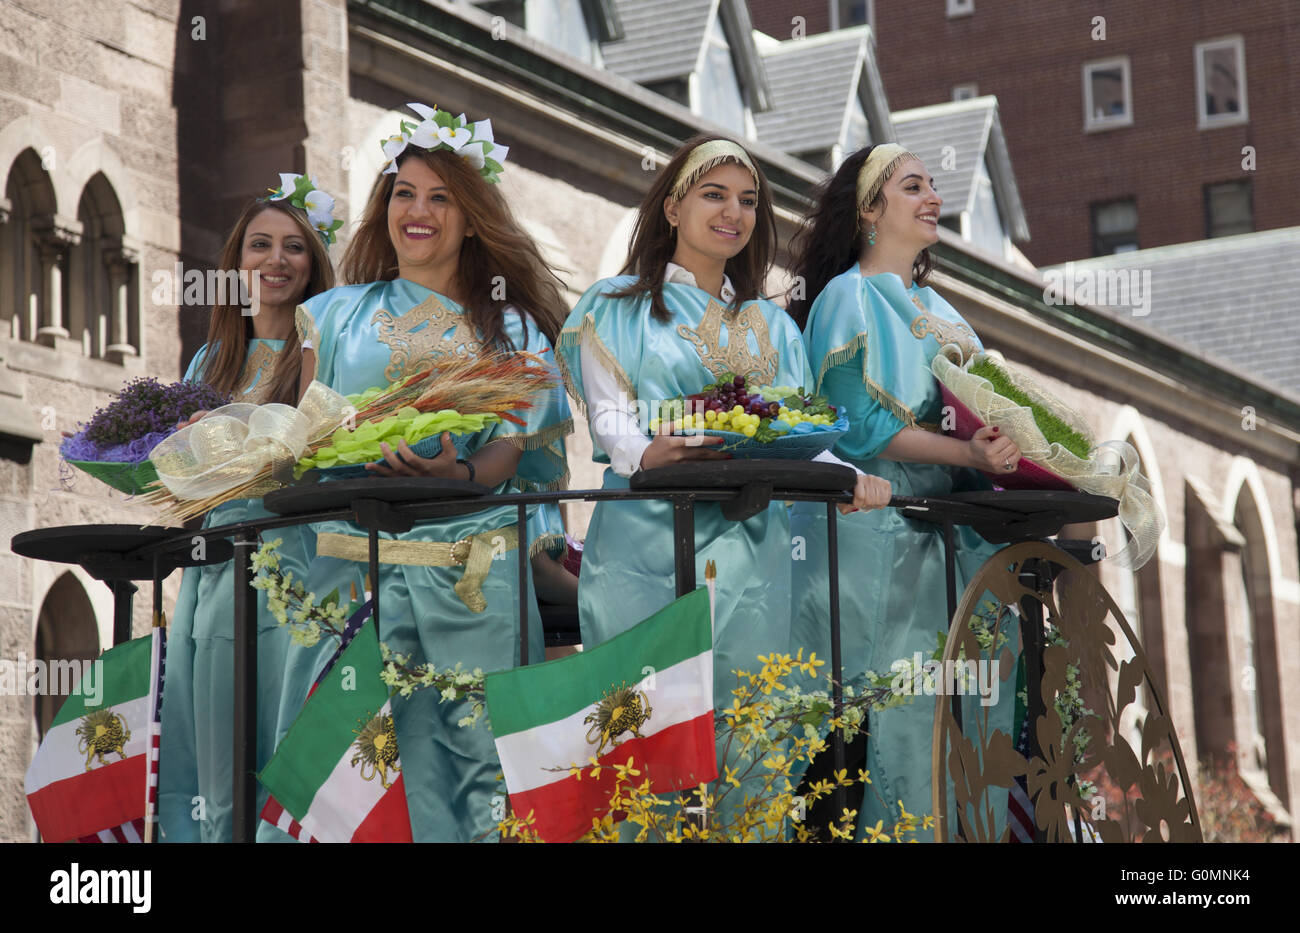 The annual Persian Parade on Madison Avenue in New York City. Costumed women with fruits and grains on a float. Stock Photo